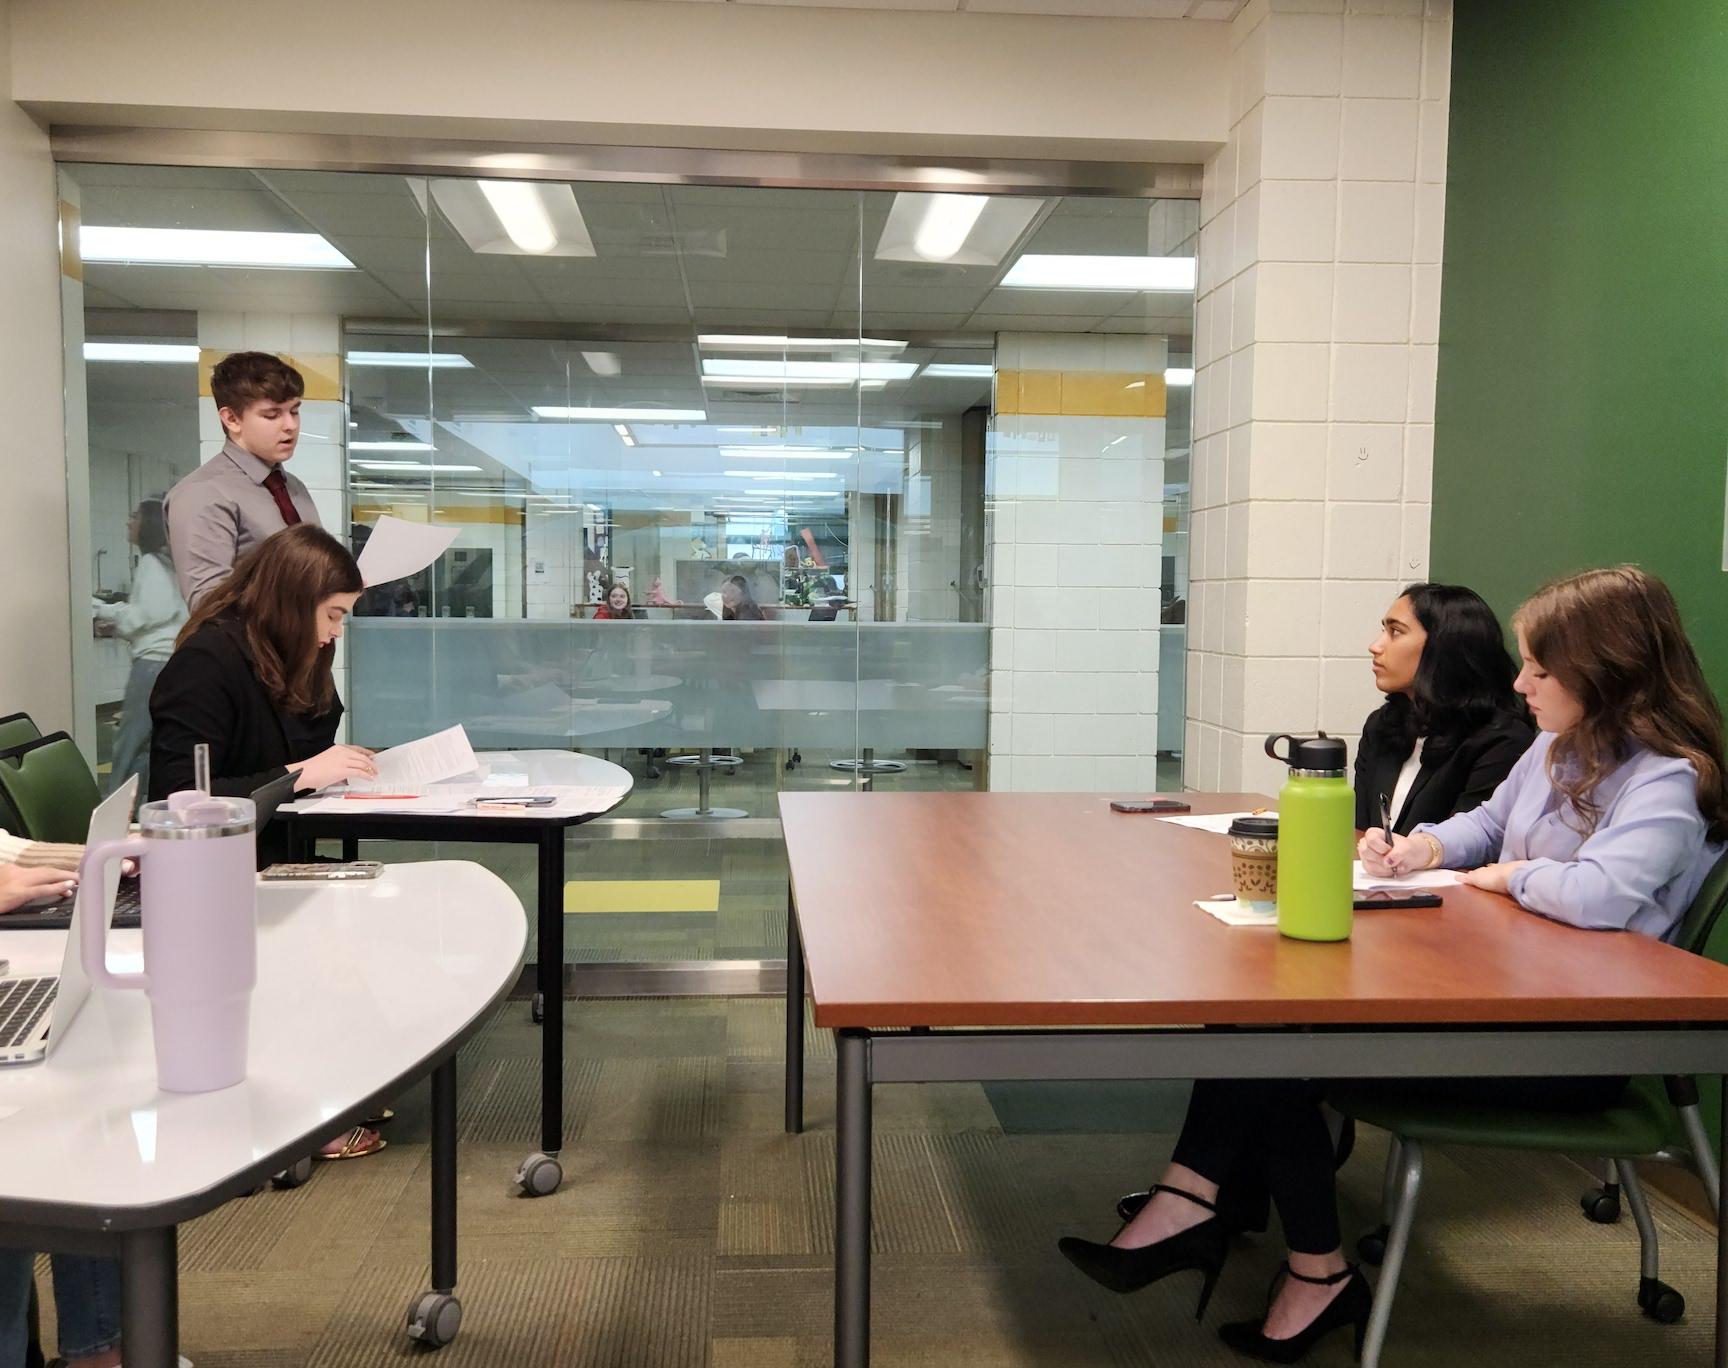 Josh and Alex (left) debate while 11th-grader Rachael Gill serves as a judge and 10th-grader Adithri Pingali observes 